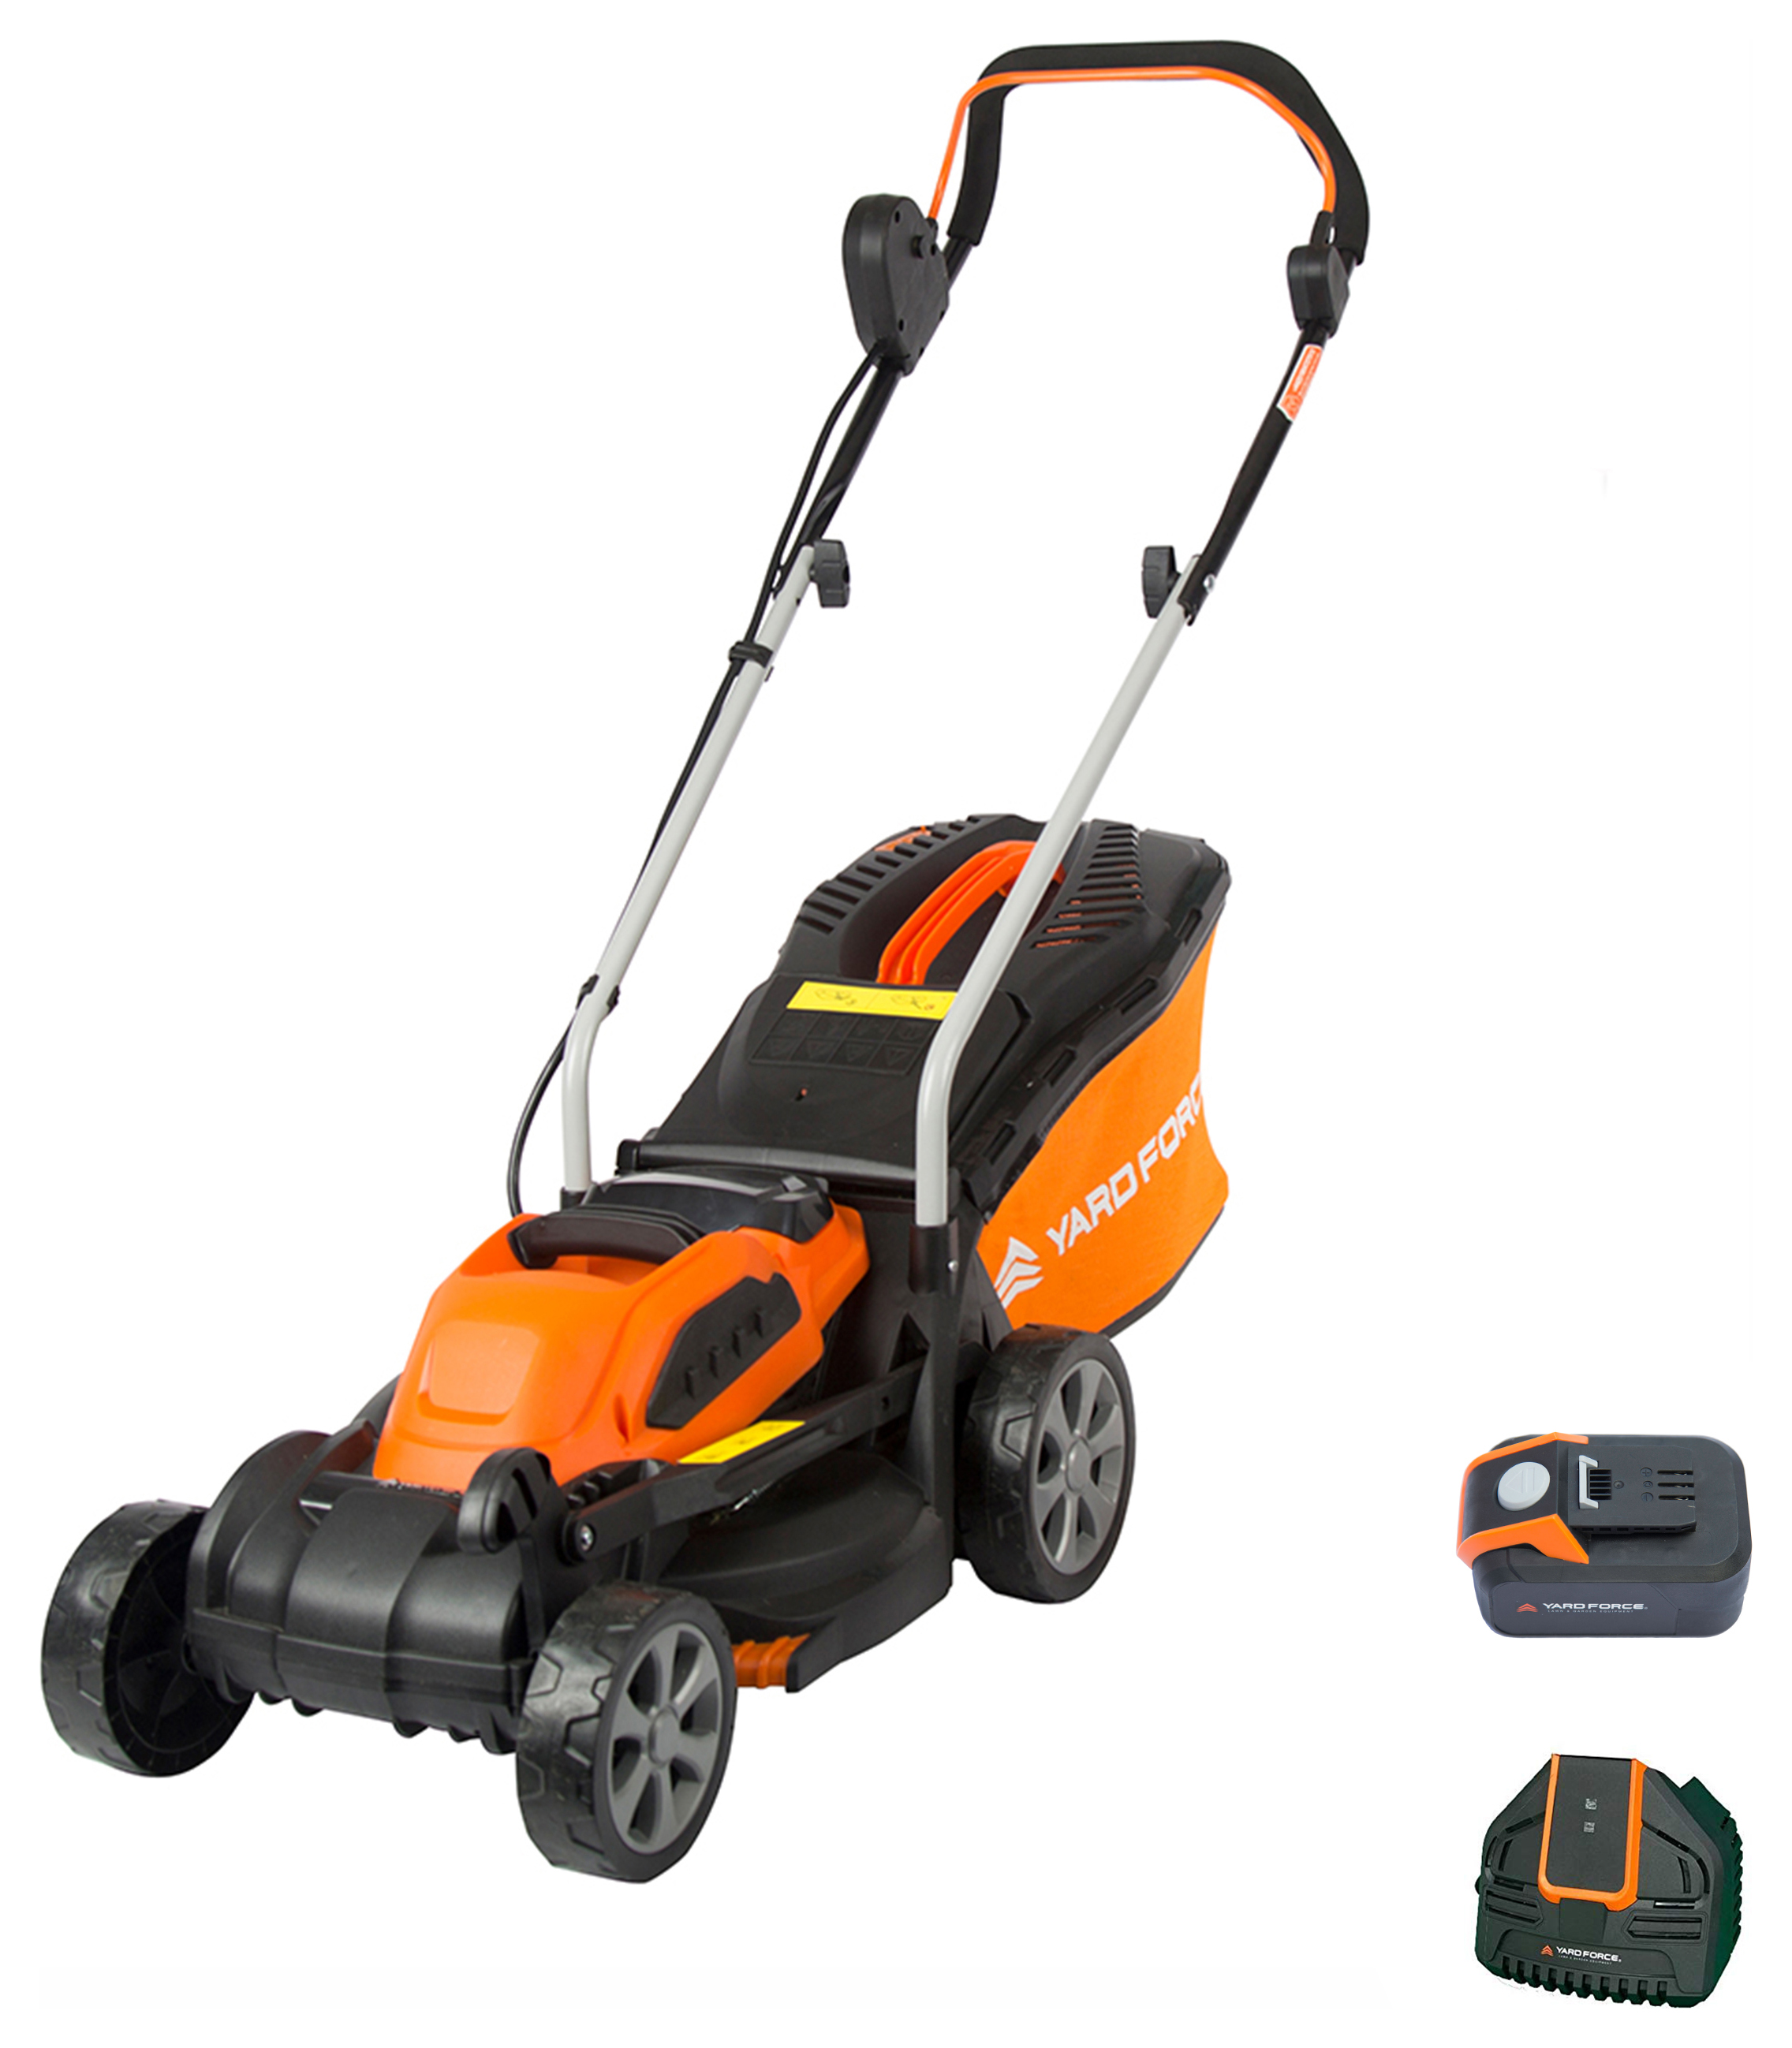 Image of Yard Force LM G32 40V 32cm Cordless Lawnmower with 2.5Ah Li-ion Battery & Quick Charger